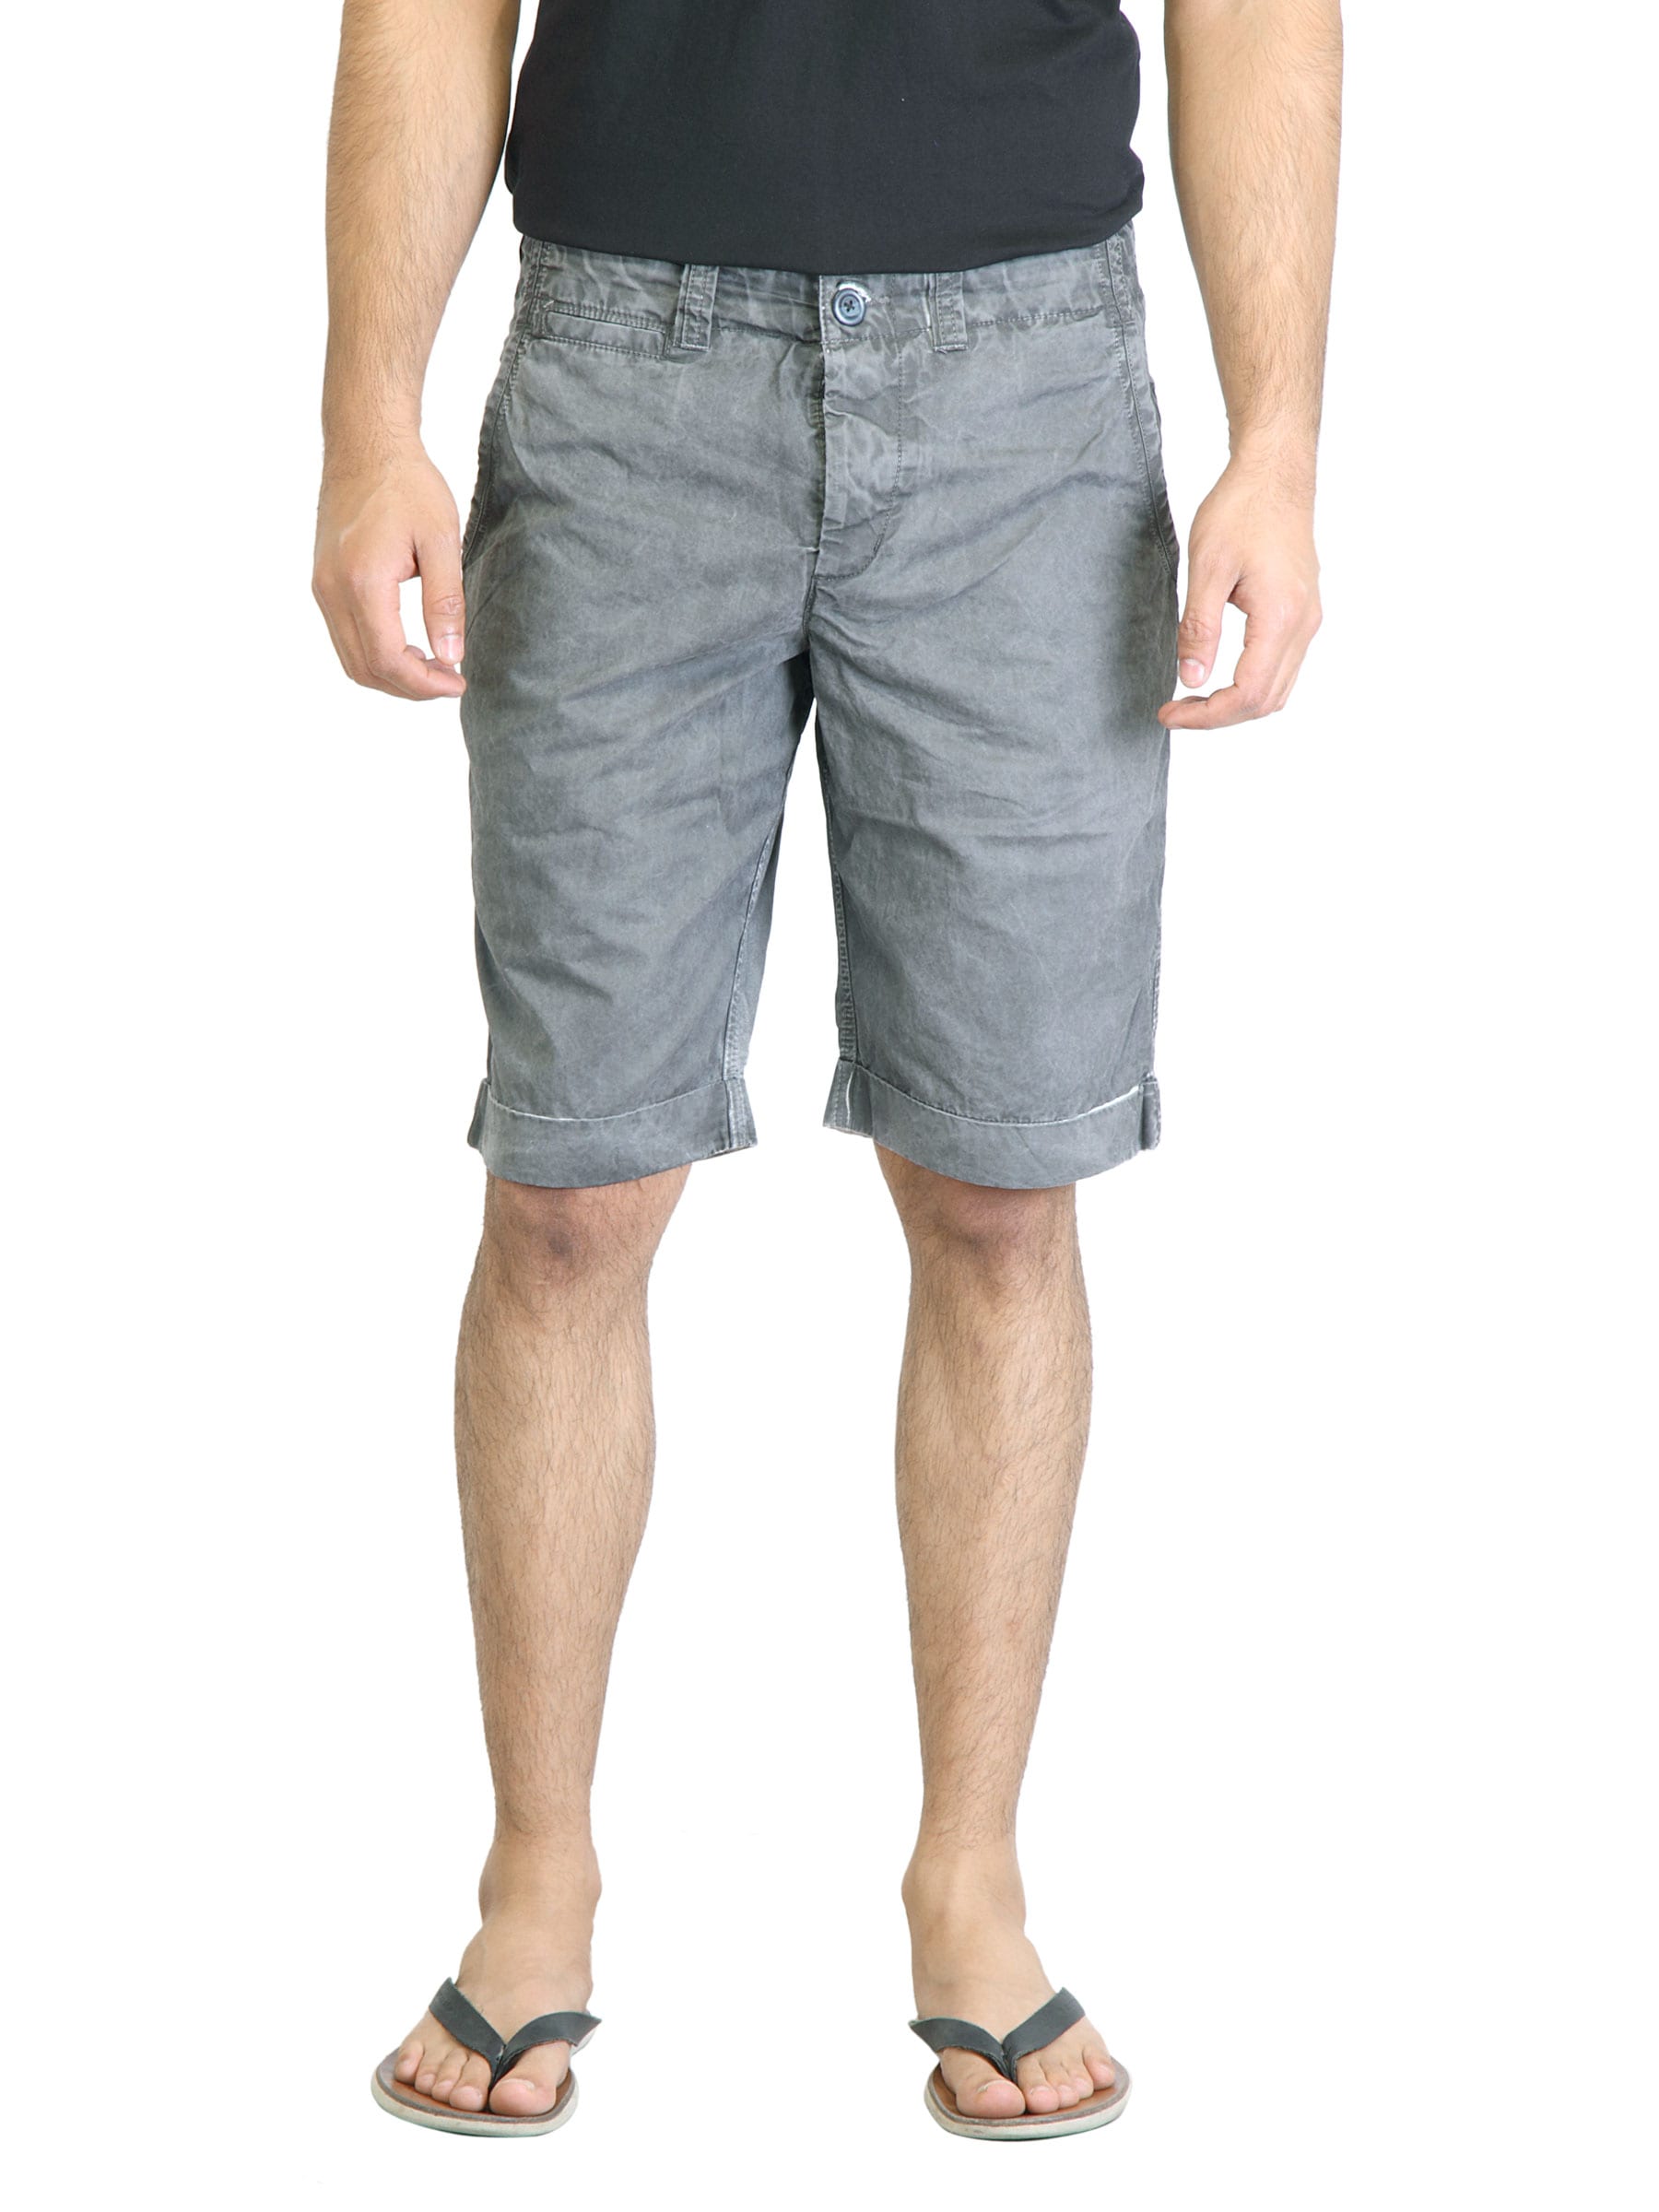 United Colors of Benetton Men Grey Washed Shorts